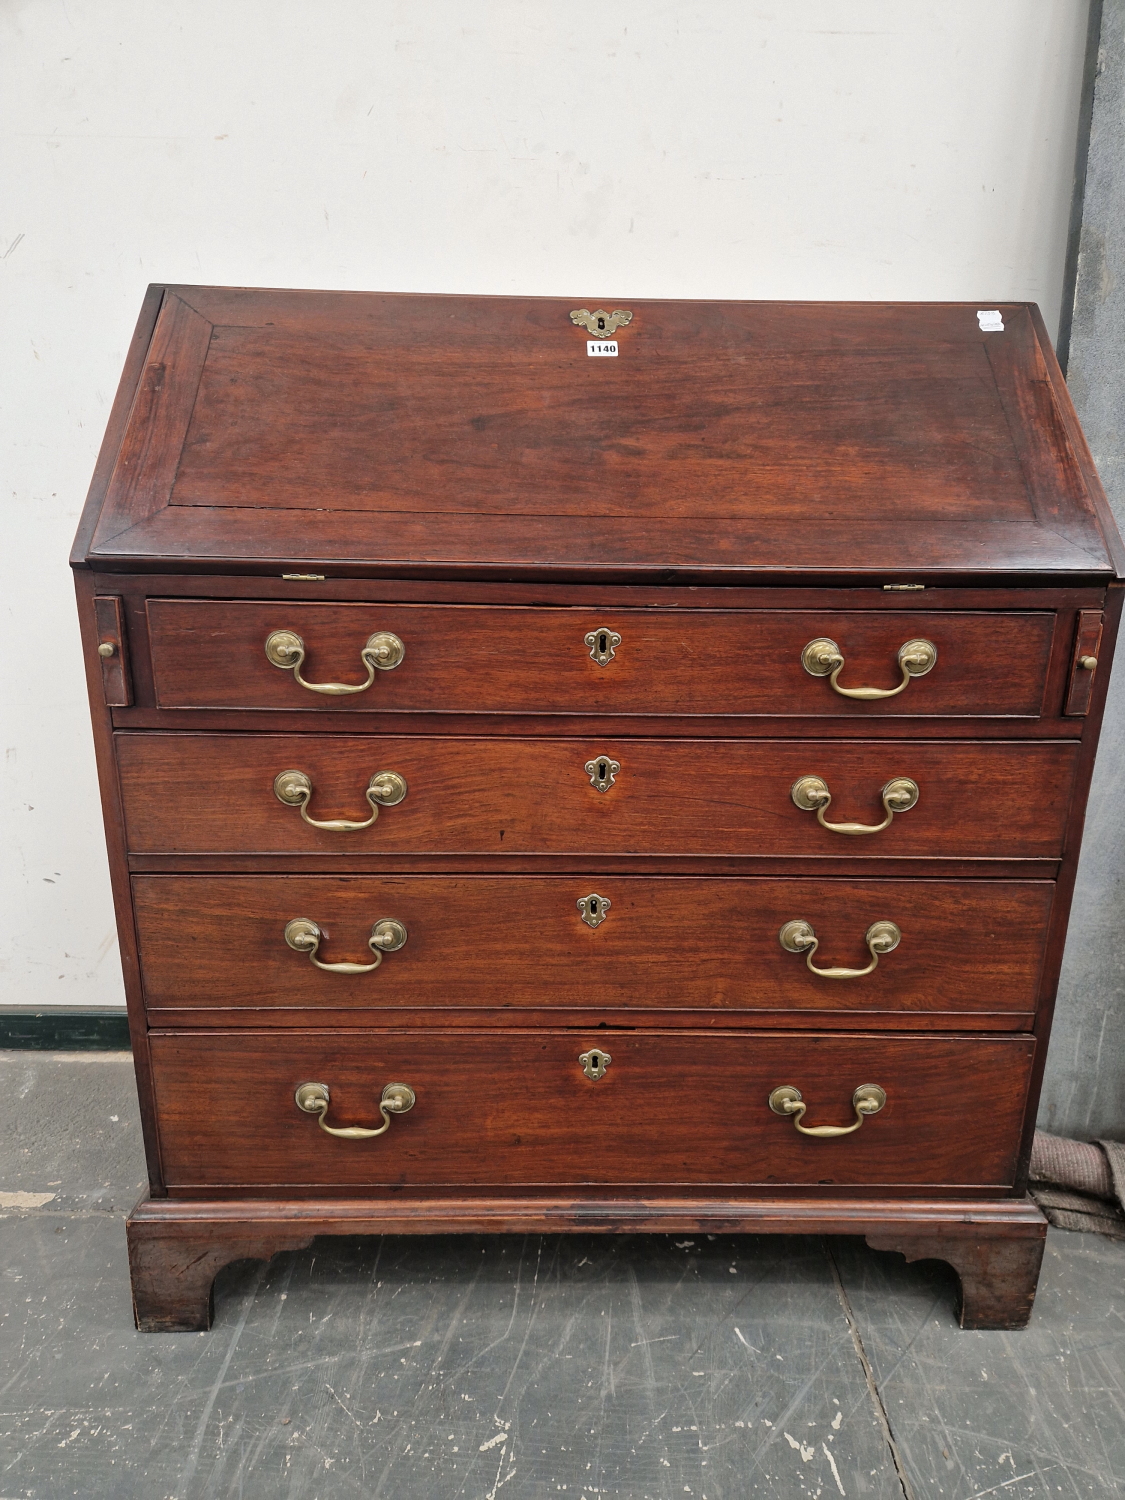 A GEORGE III FRUIT WOOD BUREAU, THE FALL ABOVE FOUR GRADED DRAWERS - Image 2 of 6